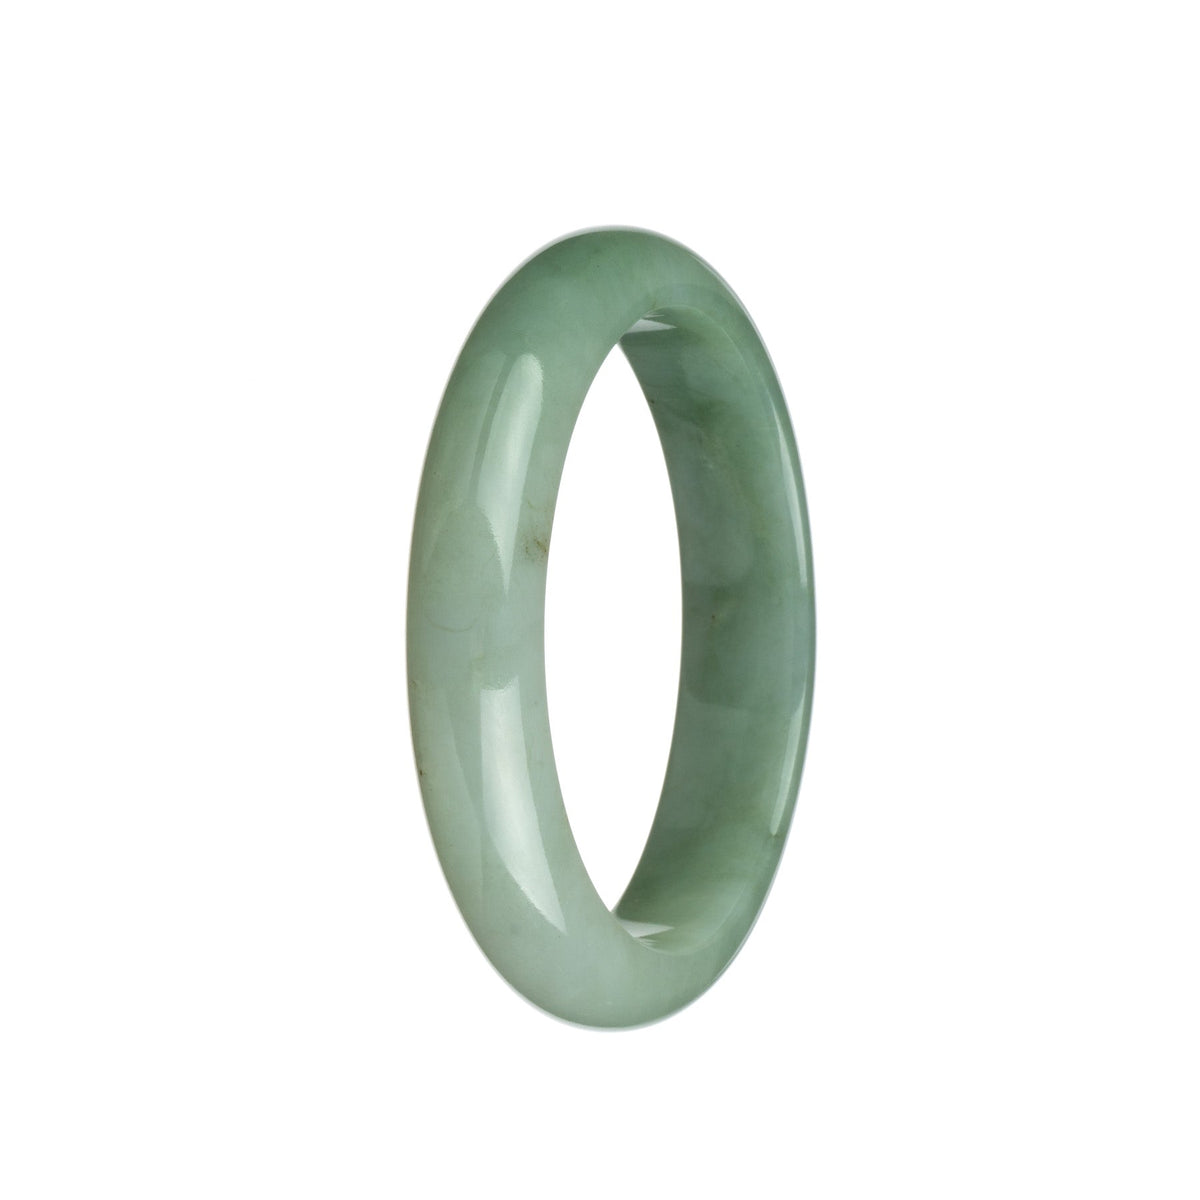 A close-up of a beautiful greyish green and white Burmese jade bracelet in the shape of a half moon, measuring 59mm in diameter. The intricate design and authentic grade A jade give it a luxurious and timeless appeal.